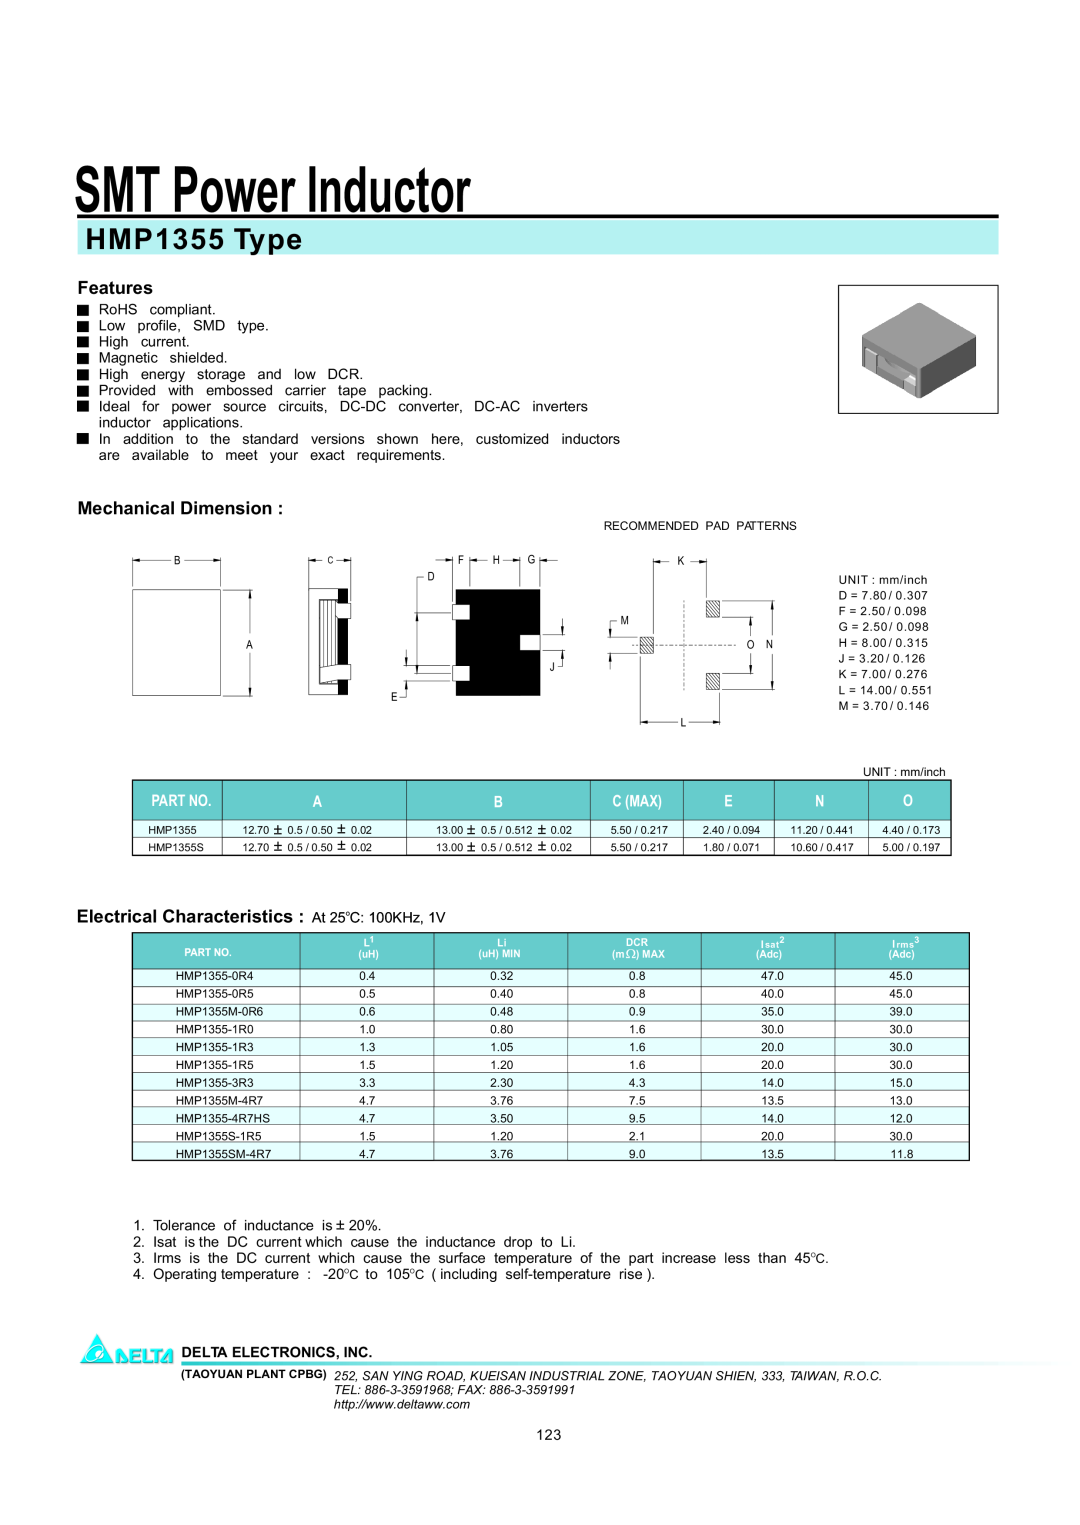 Delta Electronics manual SMT Power Inductor, HMP1355 Type, Features, Mechanical Dimension, C Max 